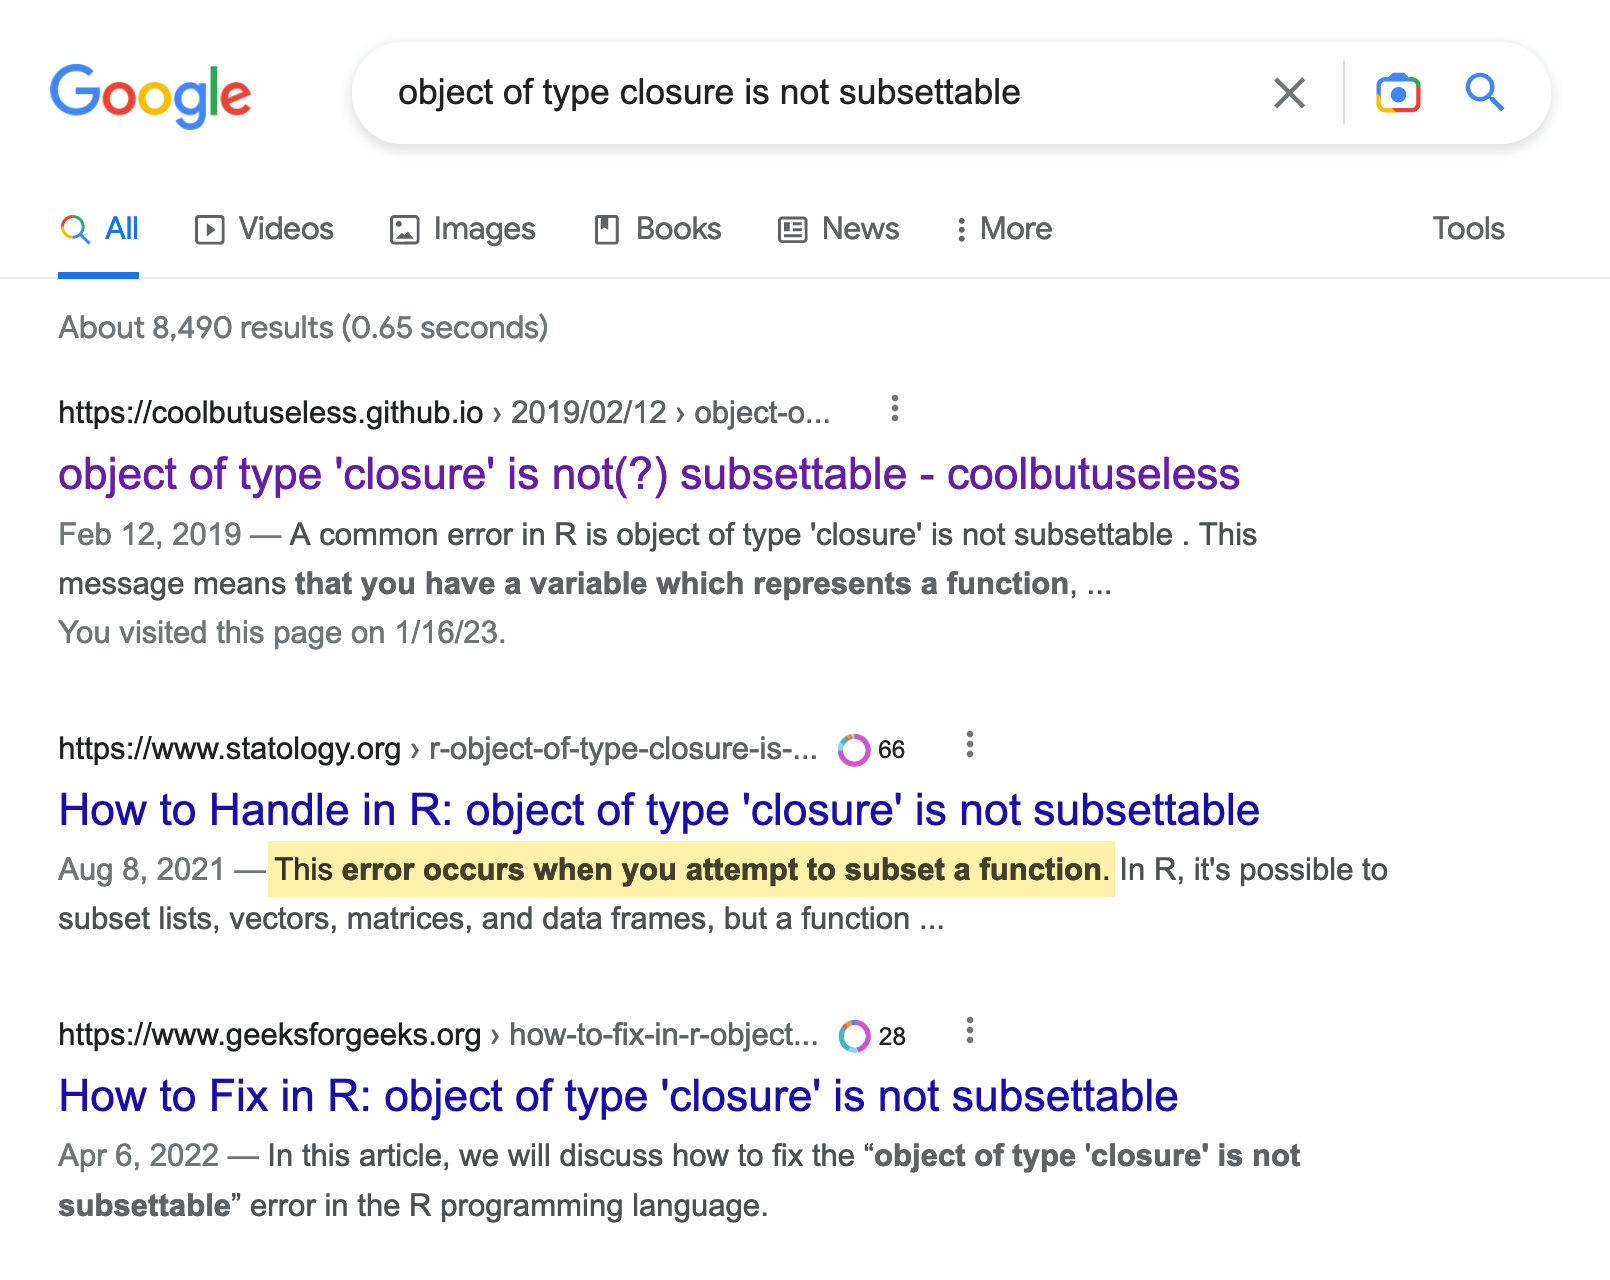 example of how googling your error can be helpful